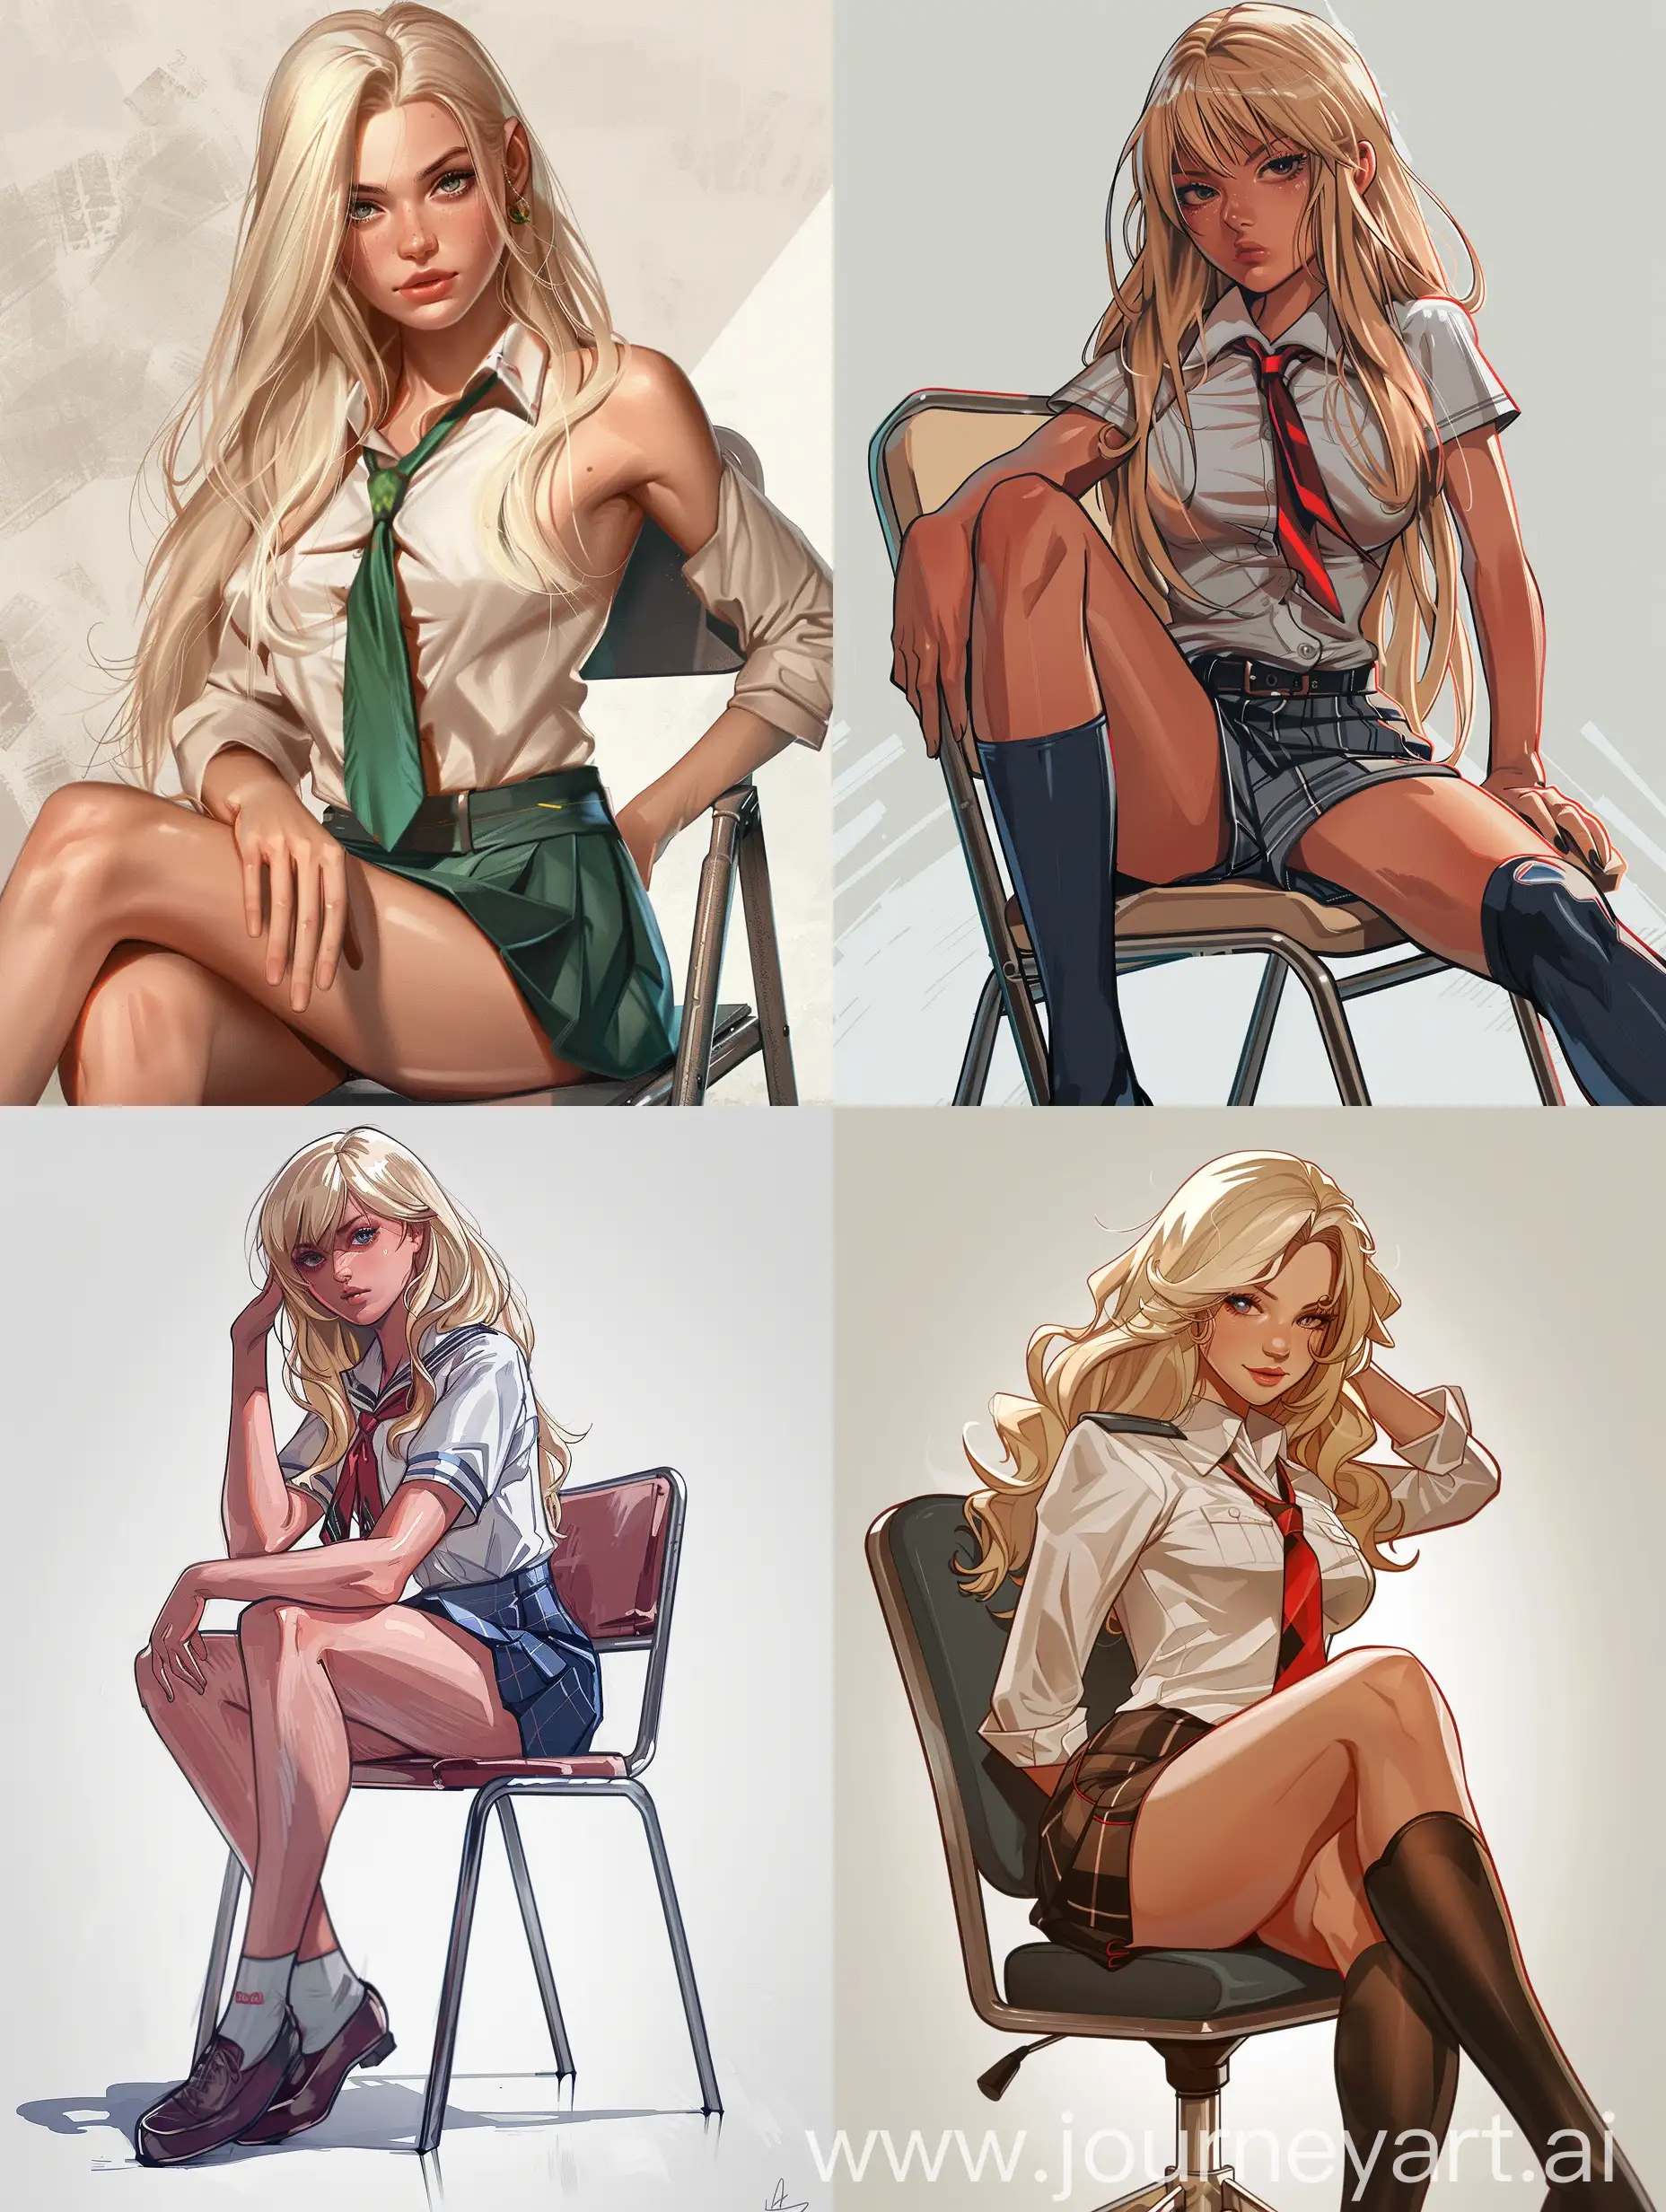 Digital art of a blonde girl , 22 years old, school uniform, sitting on chair,  gta style,  The image features clean and bold line art with dynamic line weight for depth. Dramatic cel shading and soft shading highlight her heroic pose and dynamic action. Vibrant colors with blending techniques ensure smooth transitions. Volumetric lighting adds depth, with highlights and reflections emphasizing her expressive eyes and glossy hair. Subtle textures add realism, and the composition follows the rule of thirds for balanced framing. The artwork is a full shot, meant for a 4K resolution wallpaper